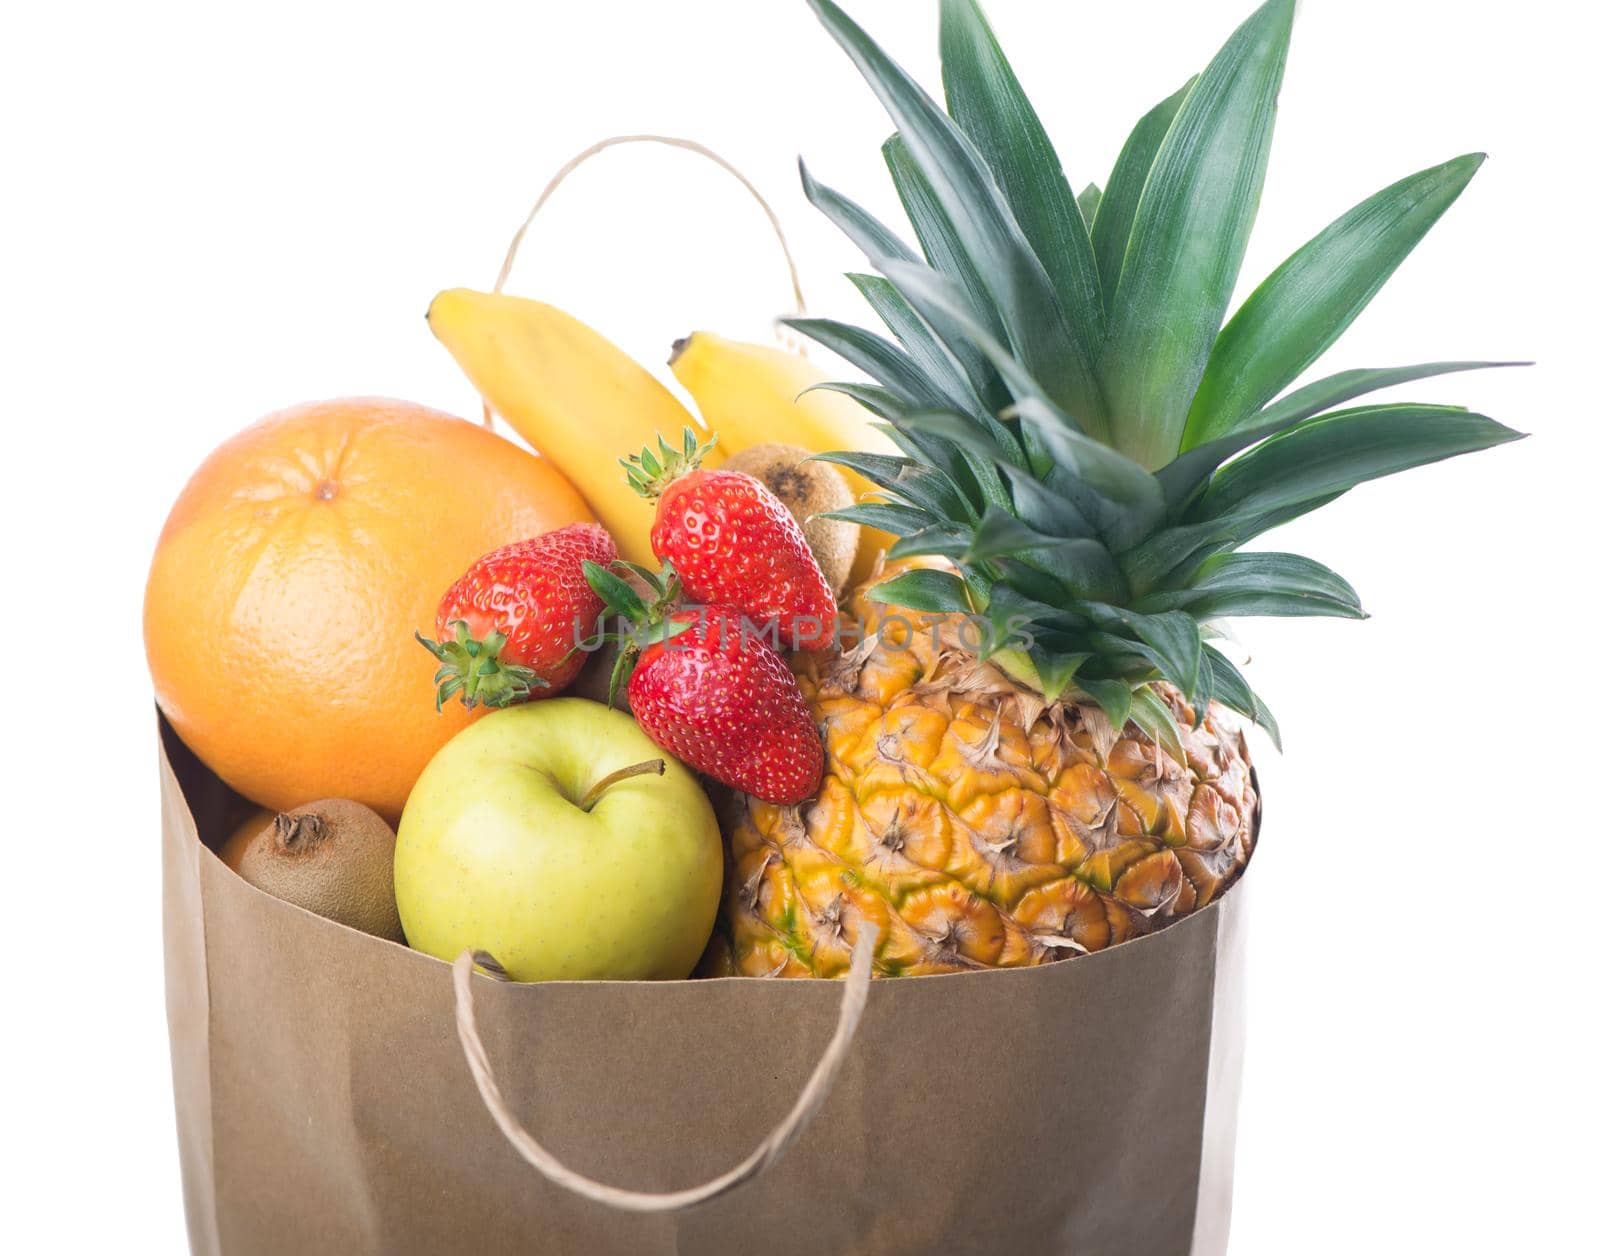 Fruits and vegetables in paper grocery bag isolated over white background